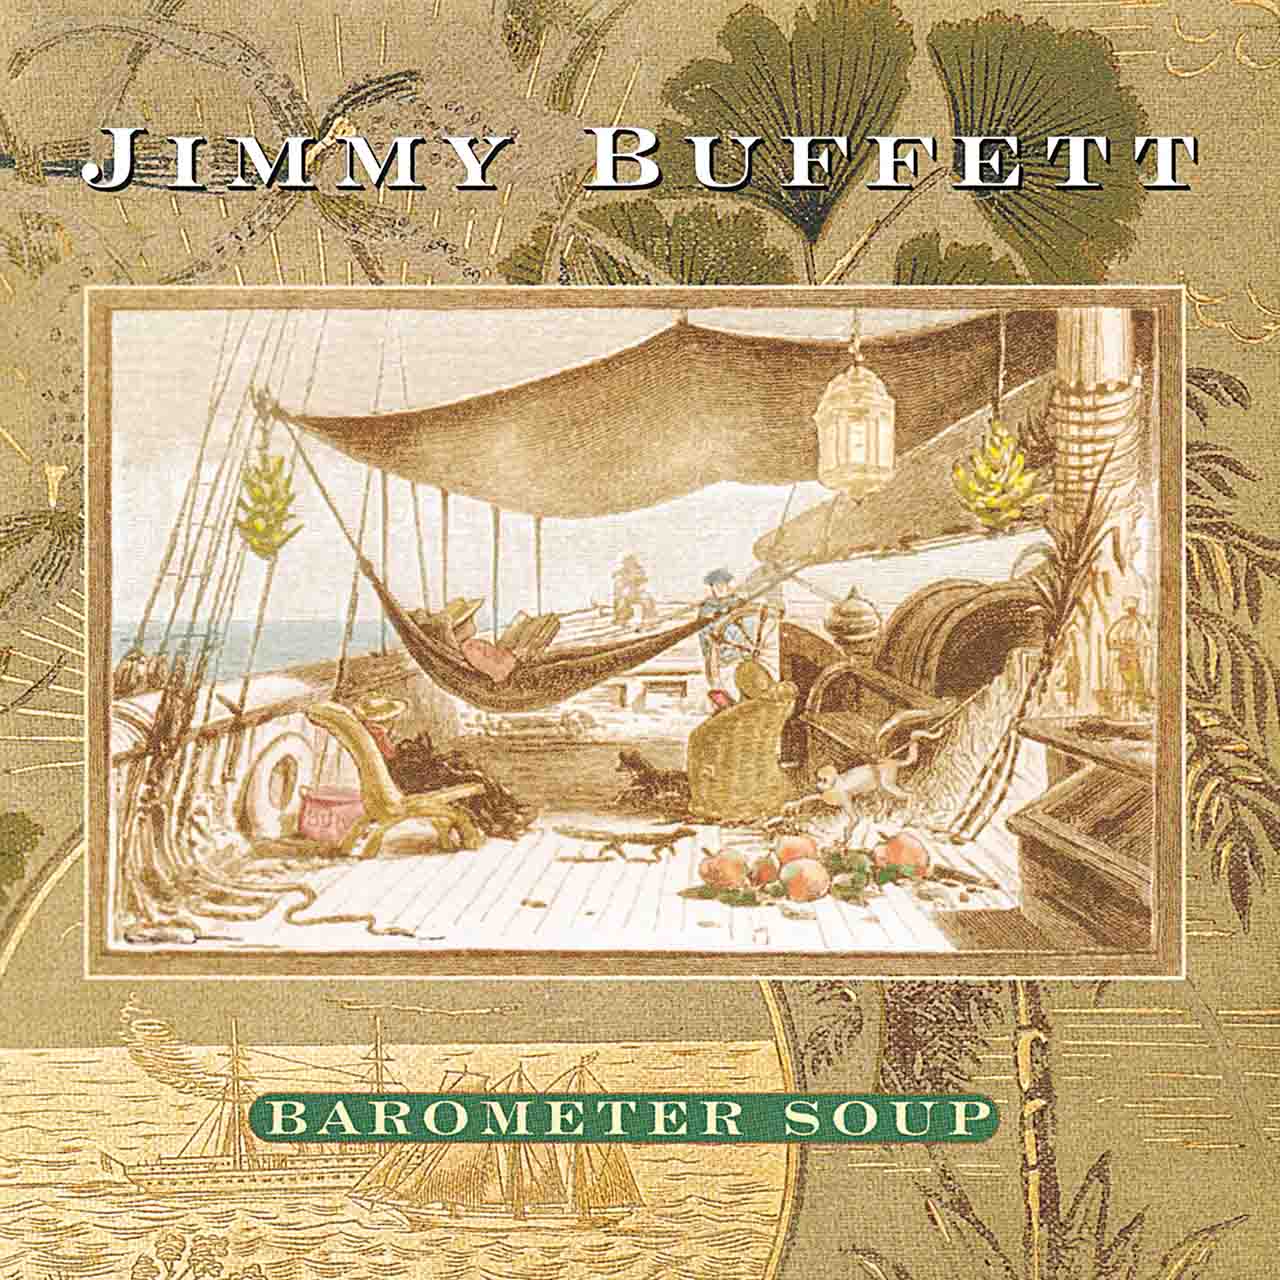 Jimmy Buffett vinyl series continues with four new editions